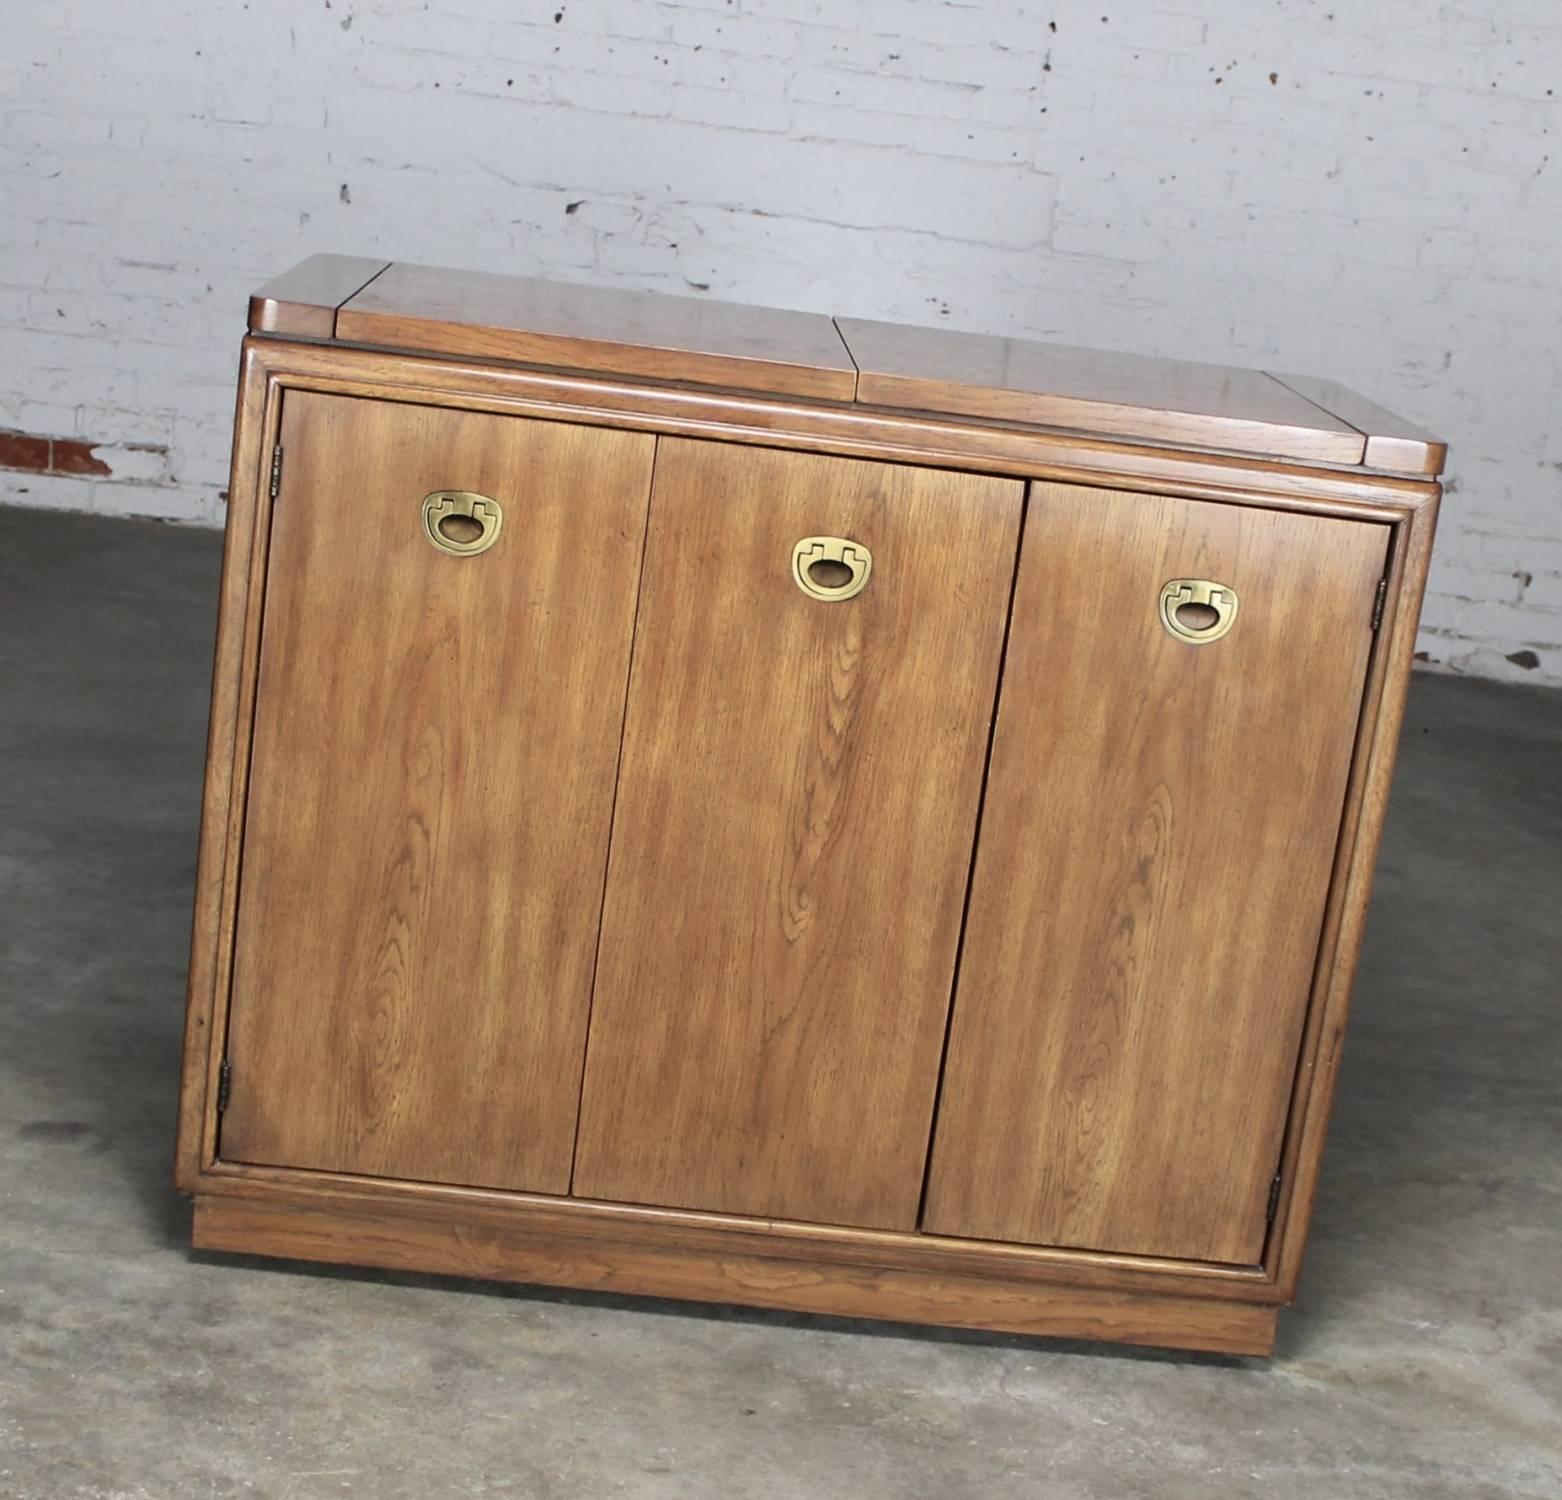 Very handsome dry bar in Mid-Century Campaign style done in oak or ash by Drexel Heritage Furniture for their passage line. This rolling bar cabinet is in phenomenal, circa 1970 condition.

Everyone needs a rolling dry bar now! It is so Mad Men.